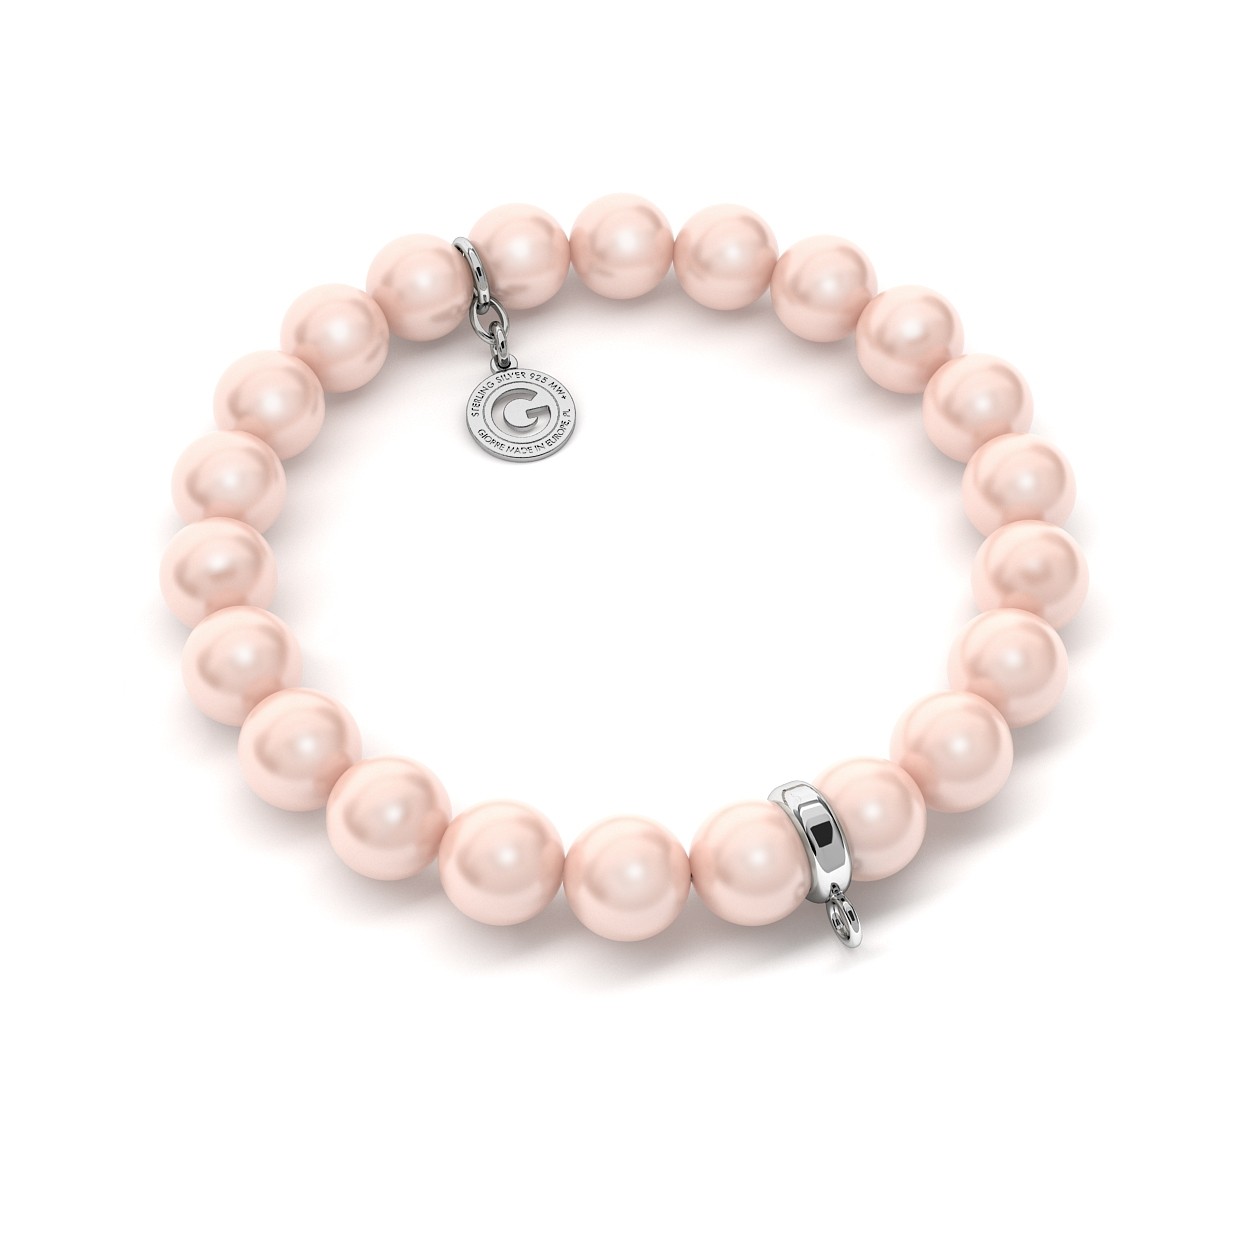 FLEXIBLE BRACELET WITH PEARLS (SWAROVSKI PEARL) FOR 1 CHARM, SILVER 925,  RHODIUM OR GOLD PLATED